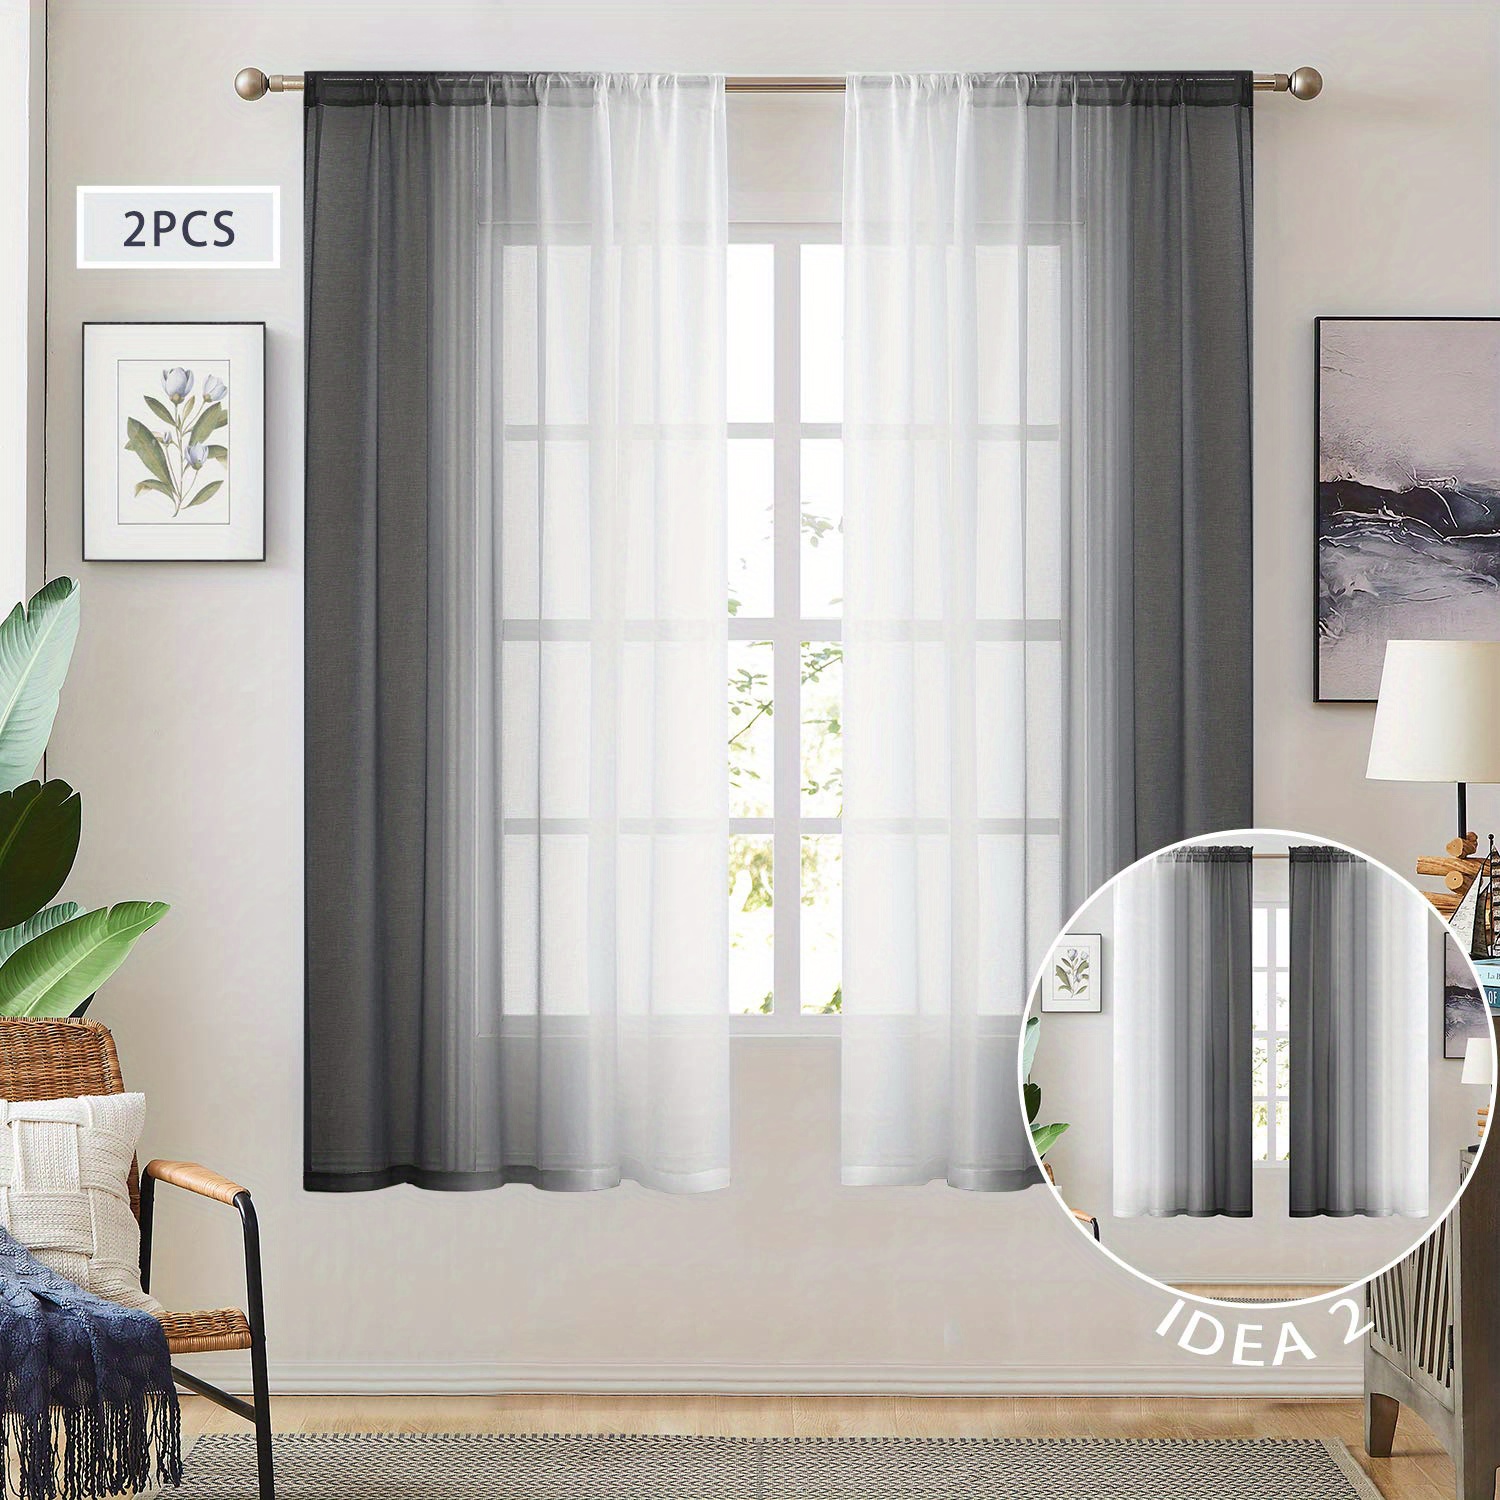 Japanese Door Curtain Solid Gradient Color For Office Kitchen